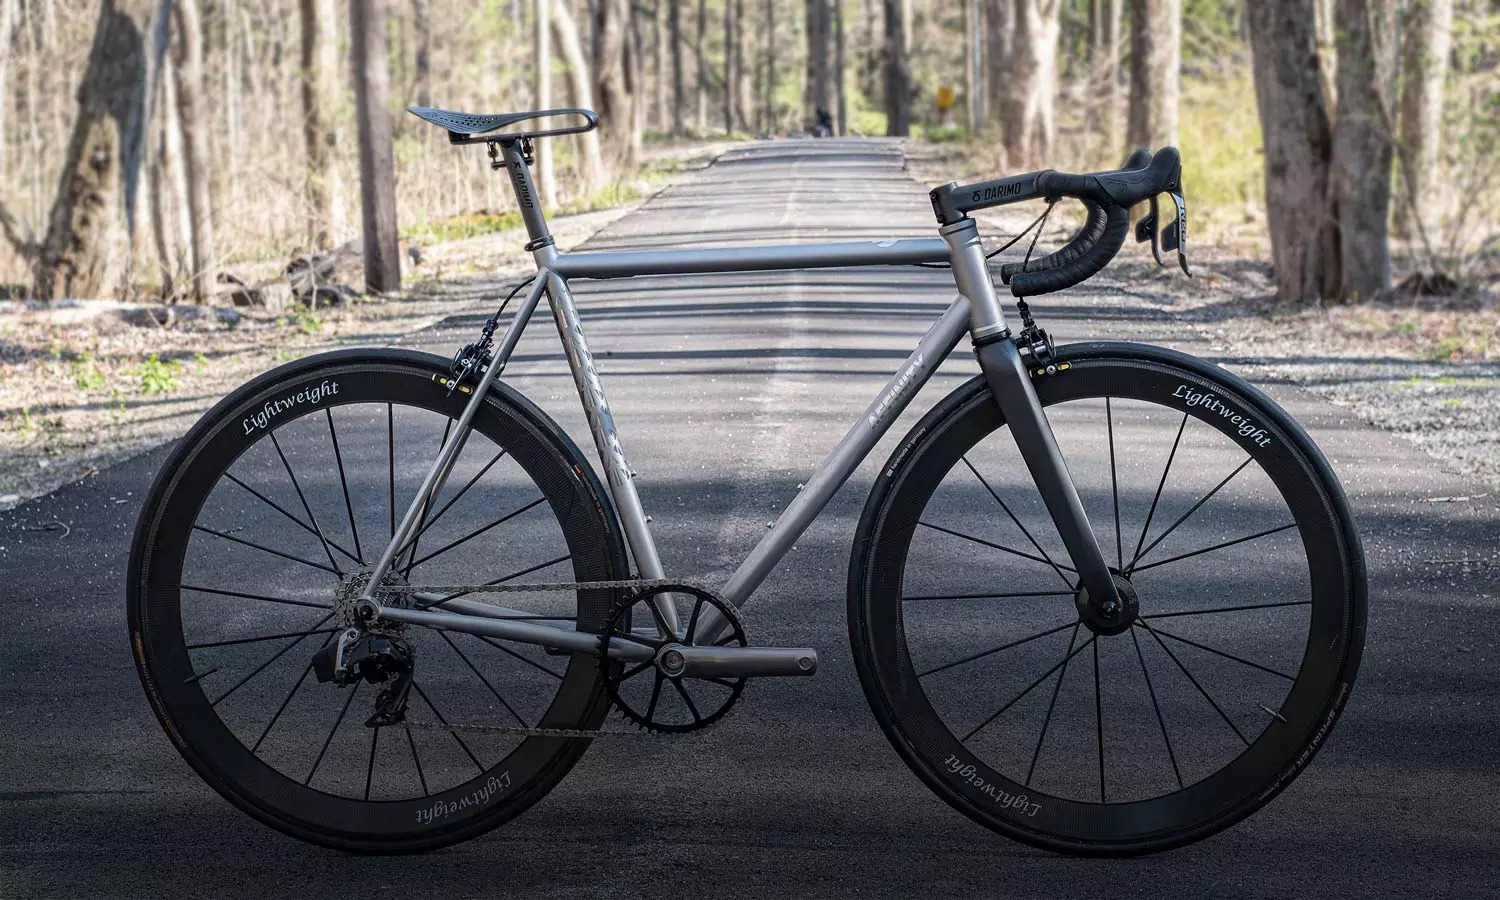 https://affinitycycles.com/explore-affinity